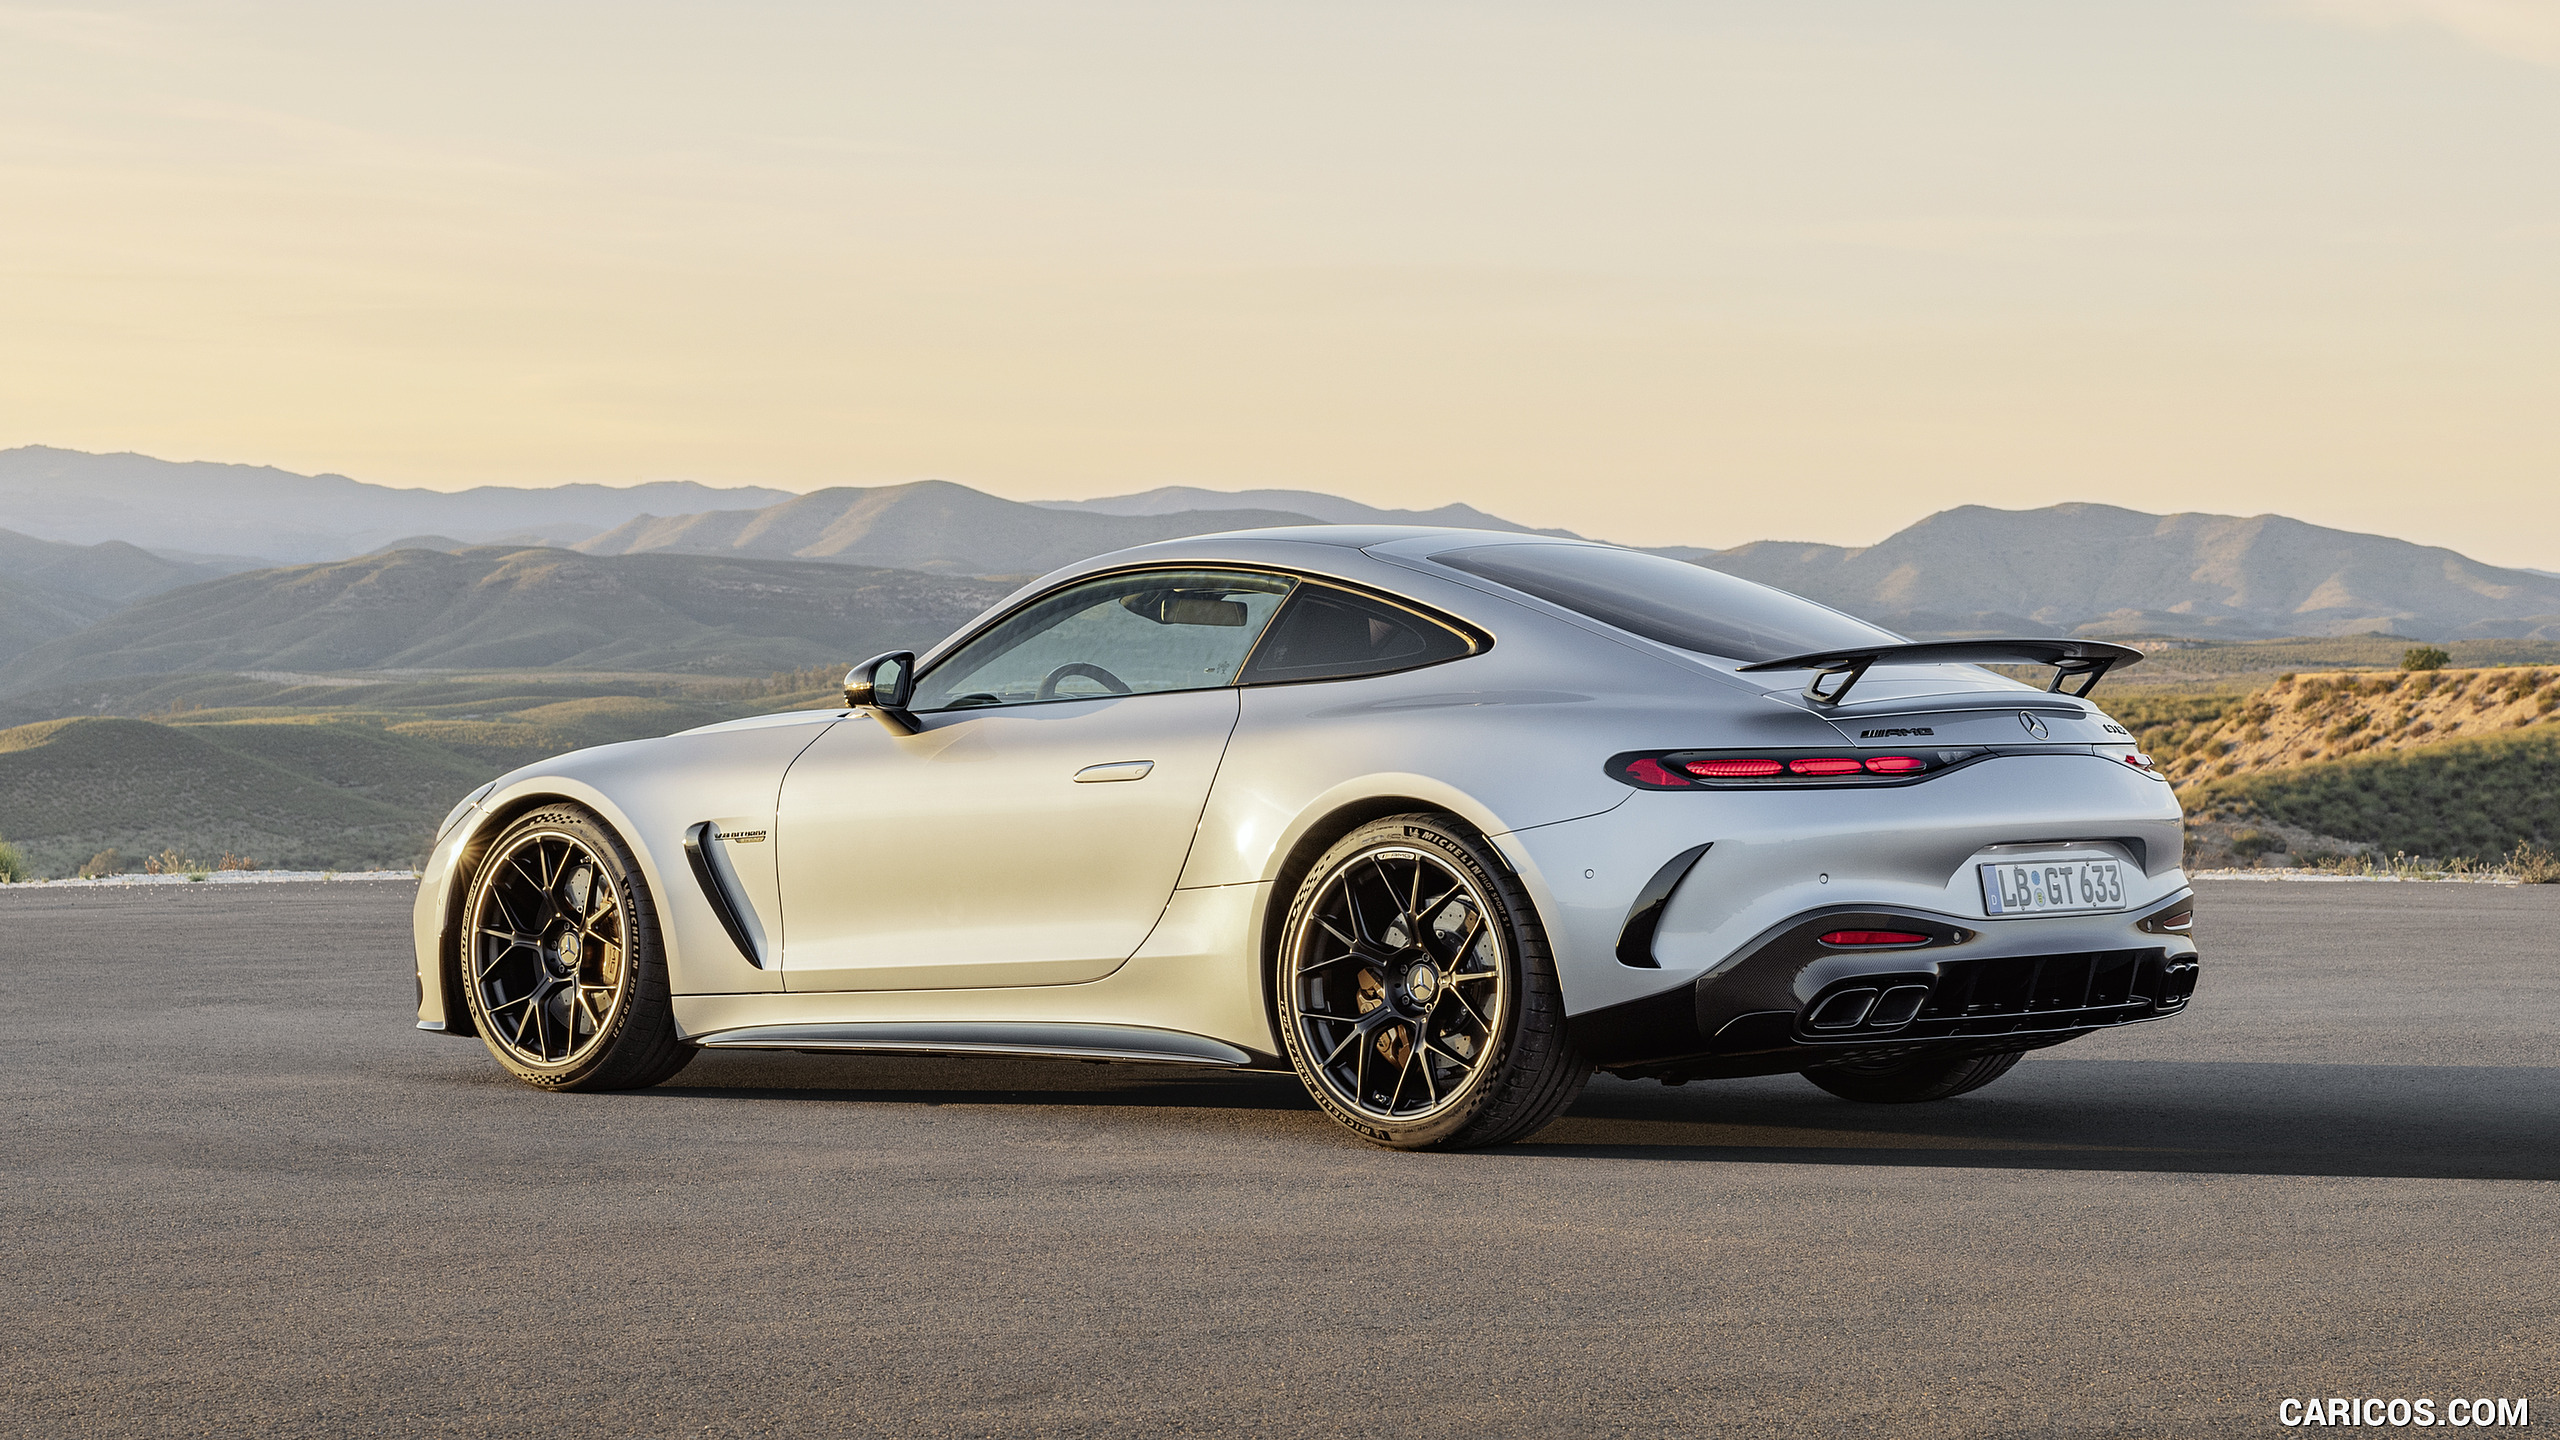 2024 MercedesAMG GT 63 Coupé 4MATIC+ with AMG Aerodynamic package